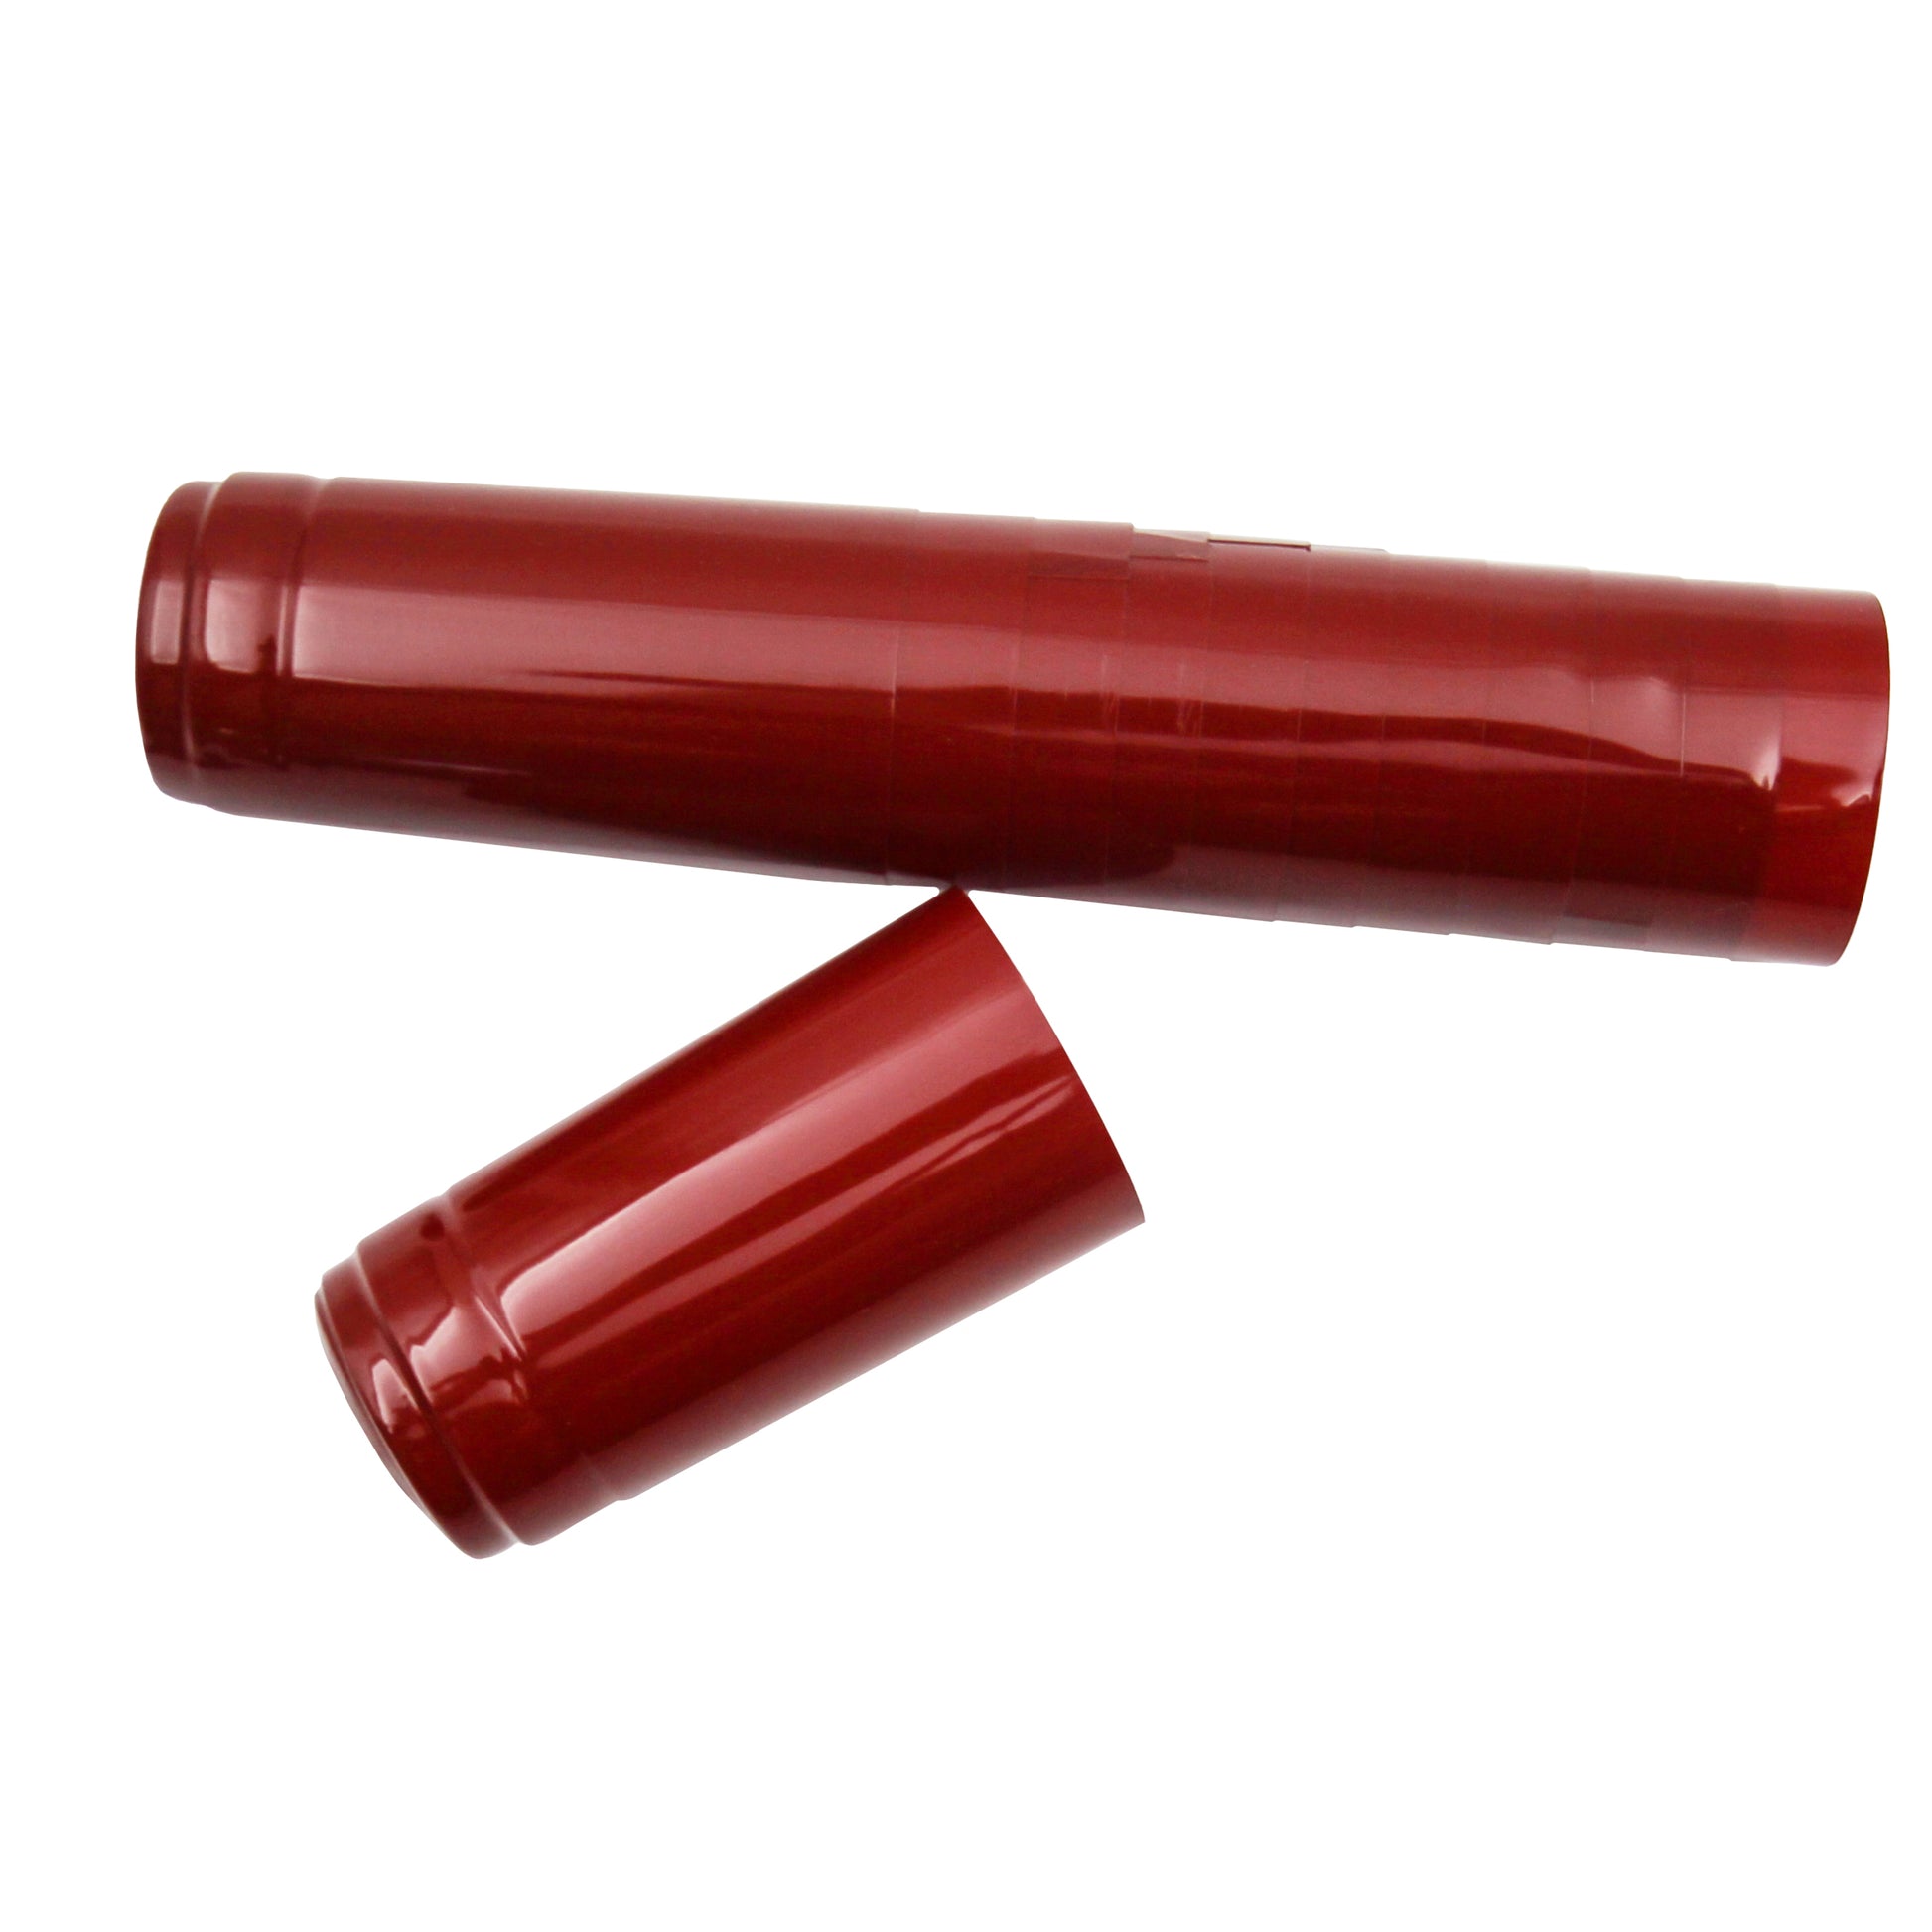 Pack of 100 rich red pvc heat shrink wine caps to suit standard 750ml wine bottles. 